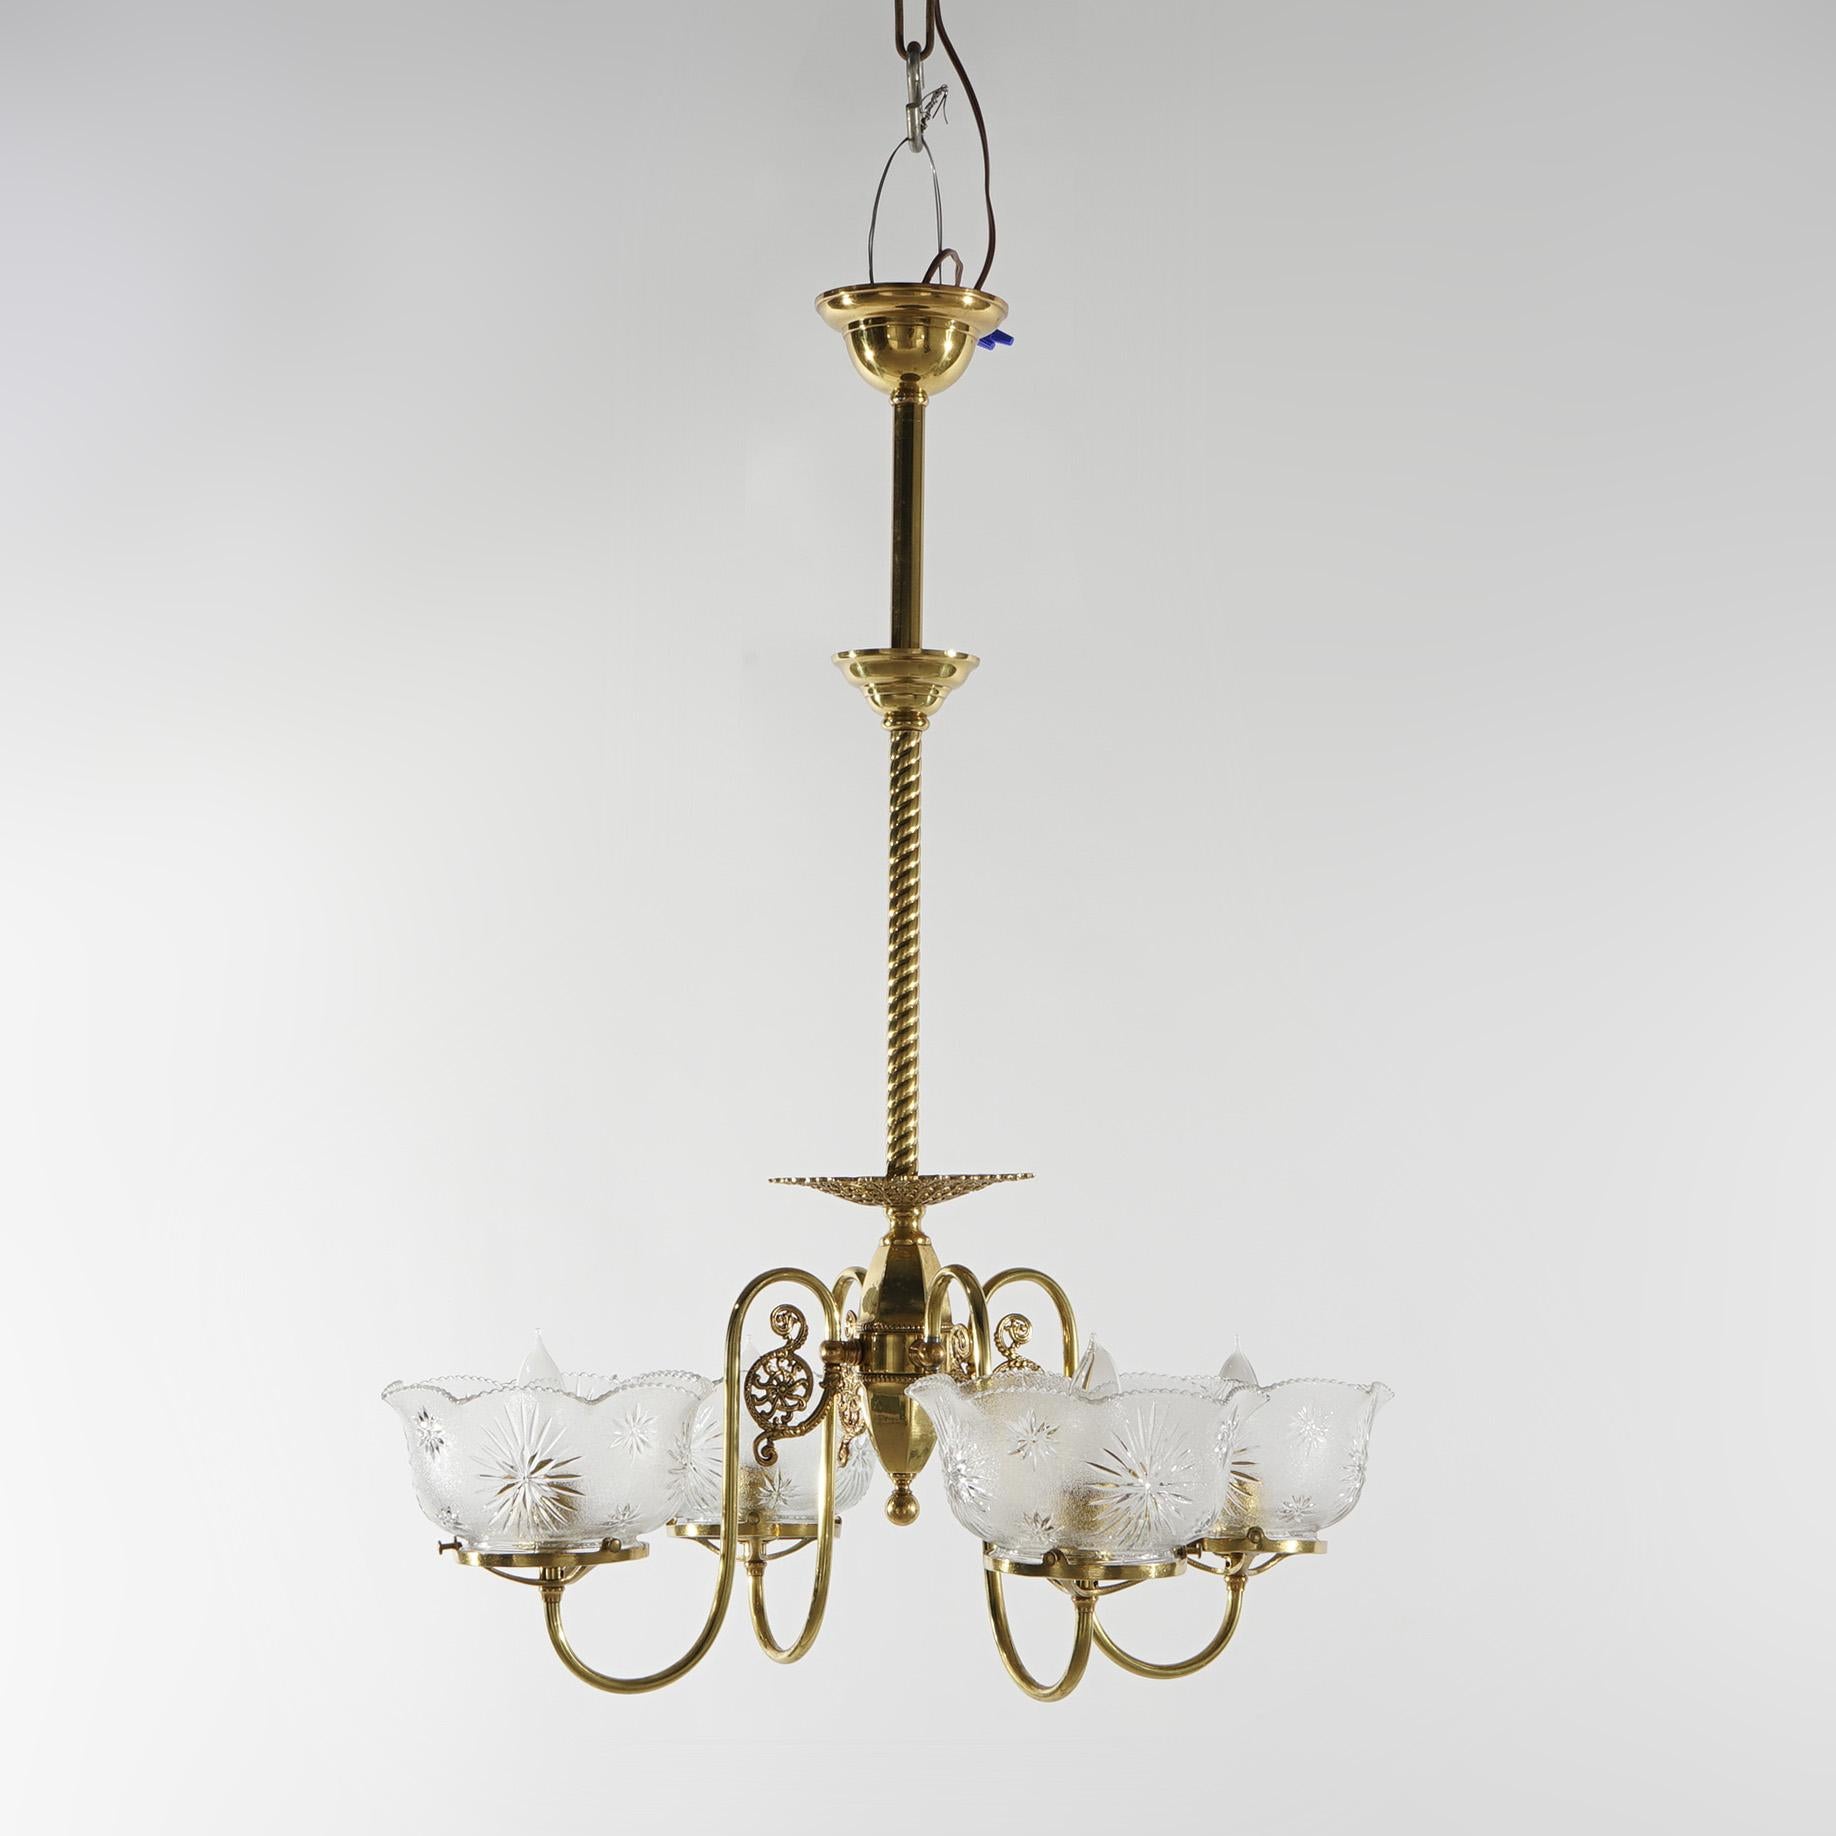 American Antique Brass Four-Arm Gas Light Hanging Fixture with Glass Shades C1880 For Sale